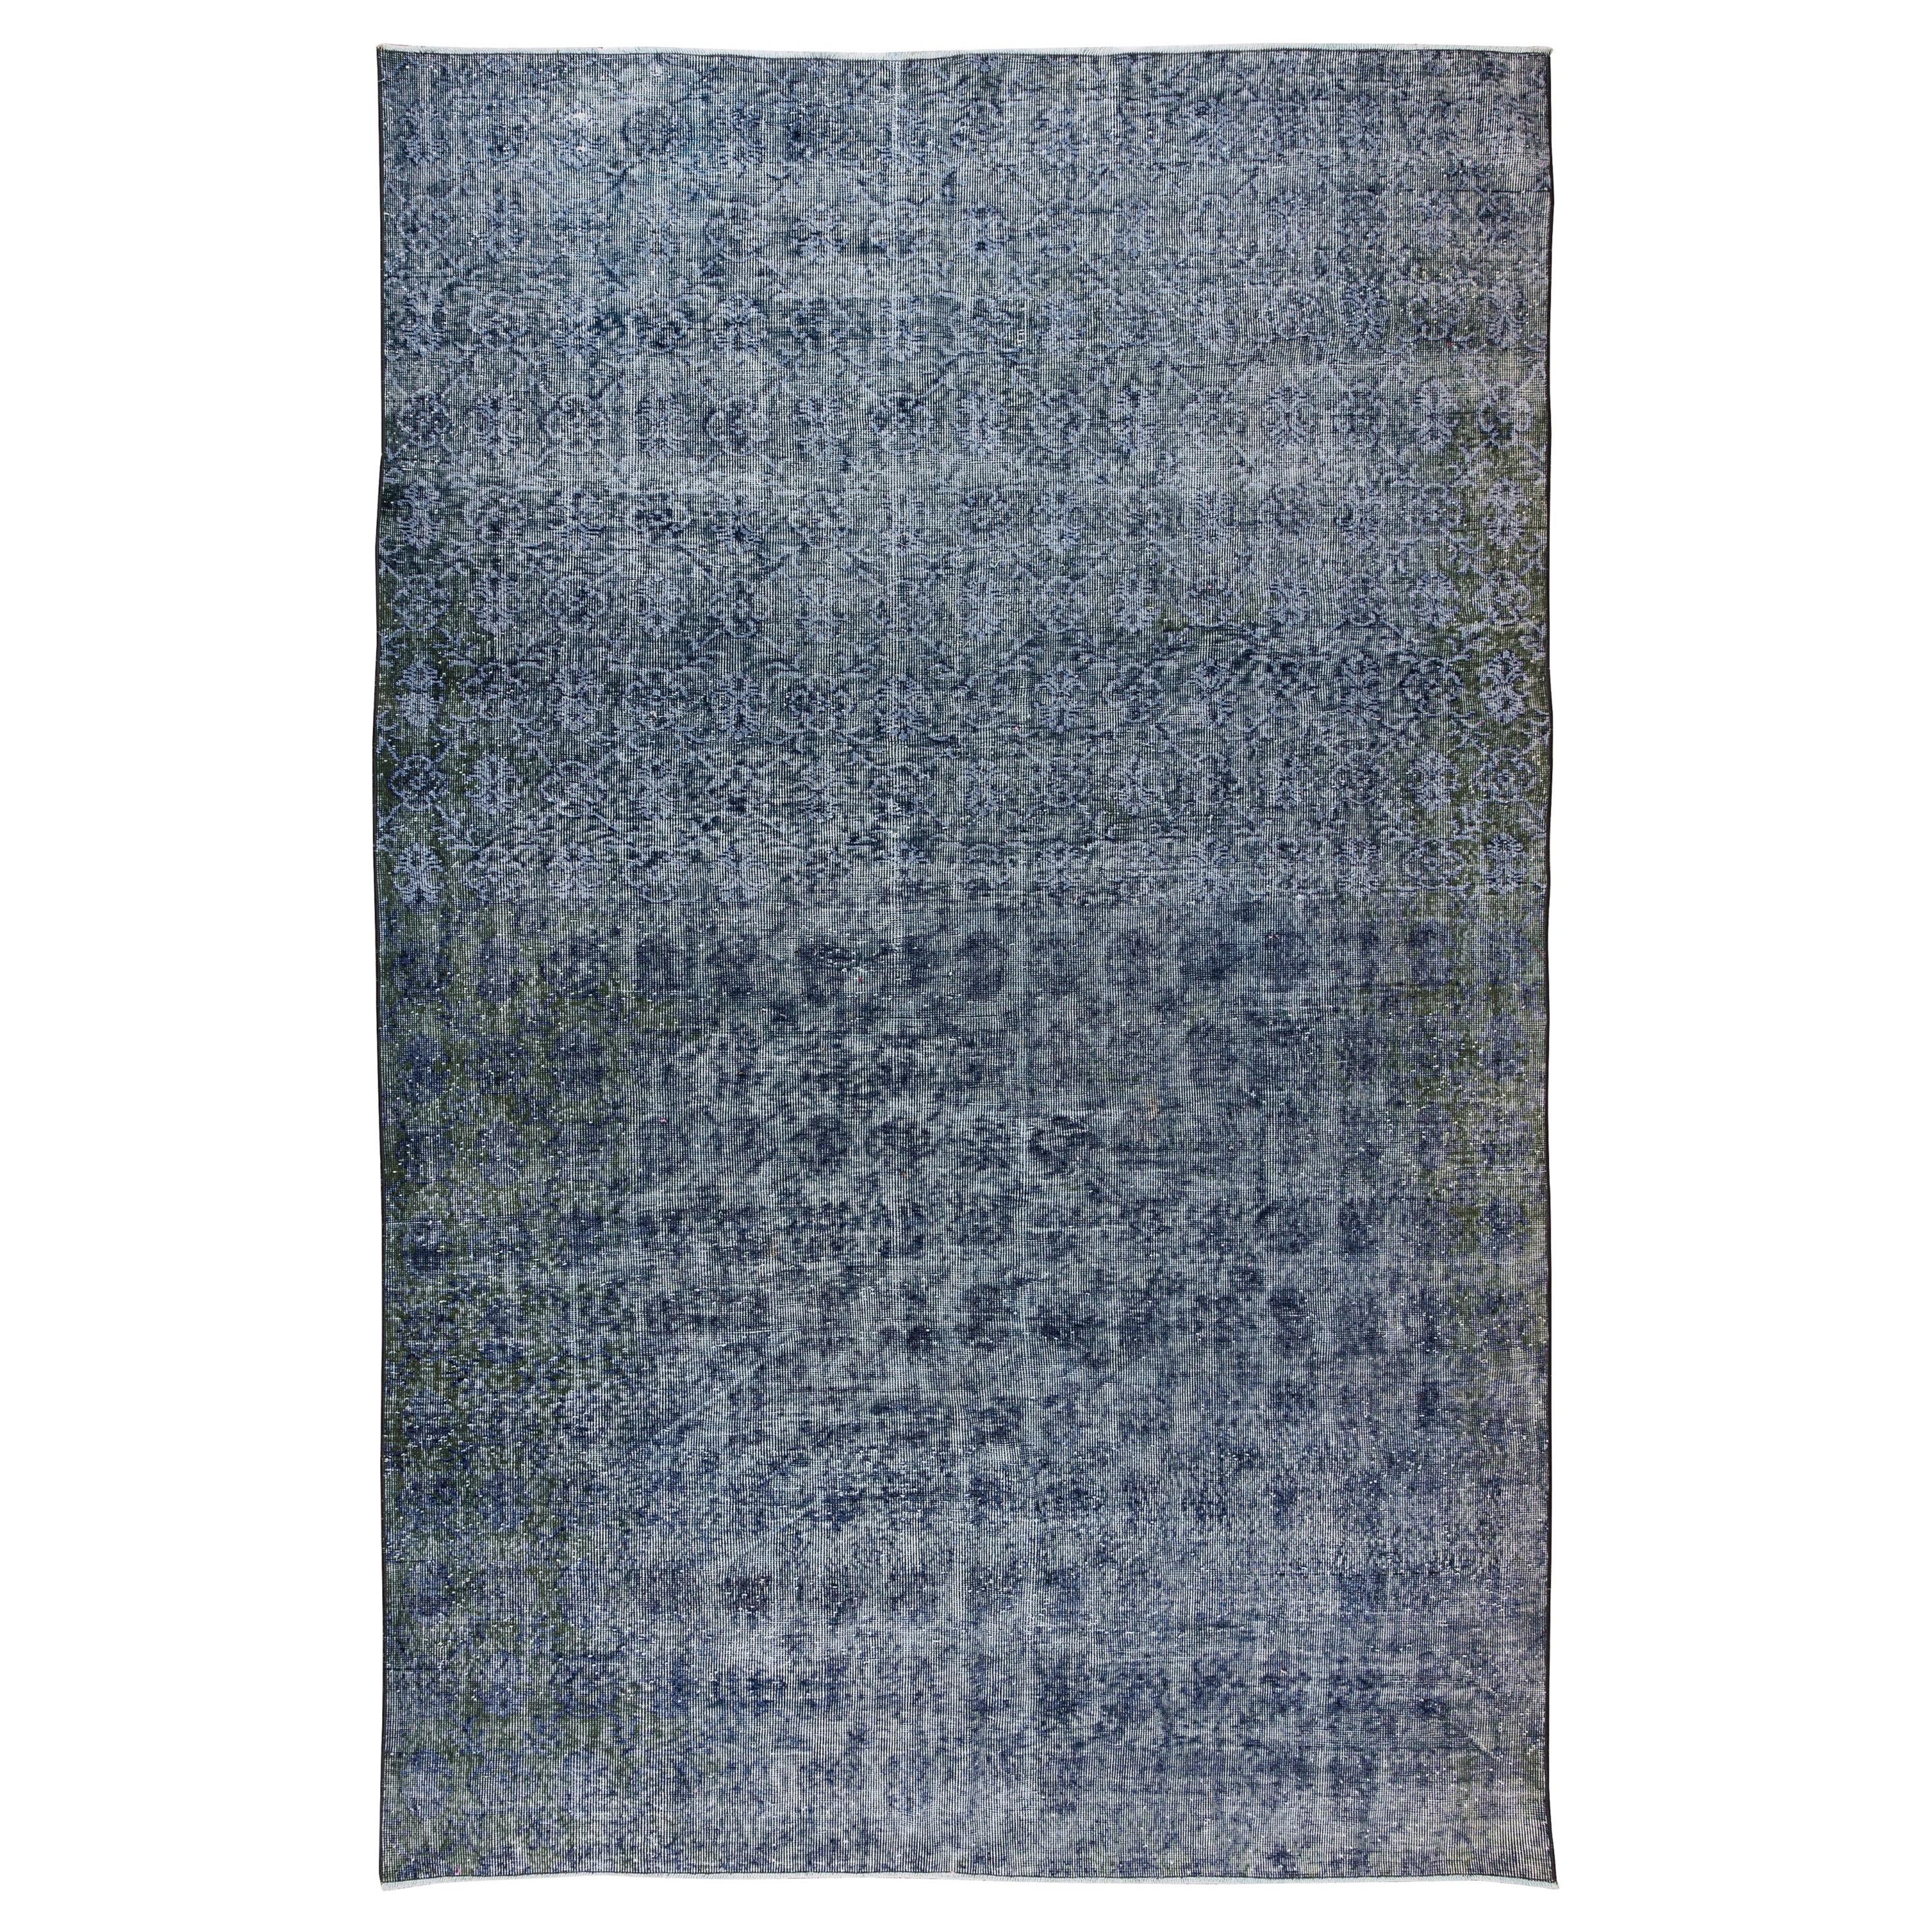 7x10.5 Ft Handmade Turkish Wool Area Rug in Navy Blue for Modern Interiors